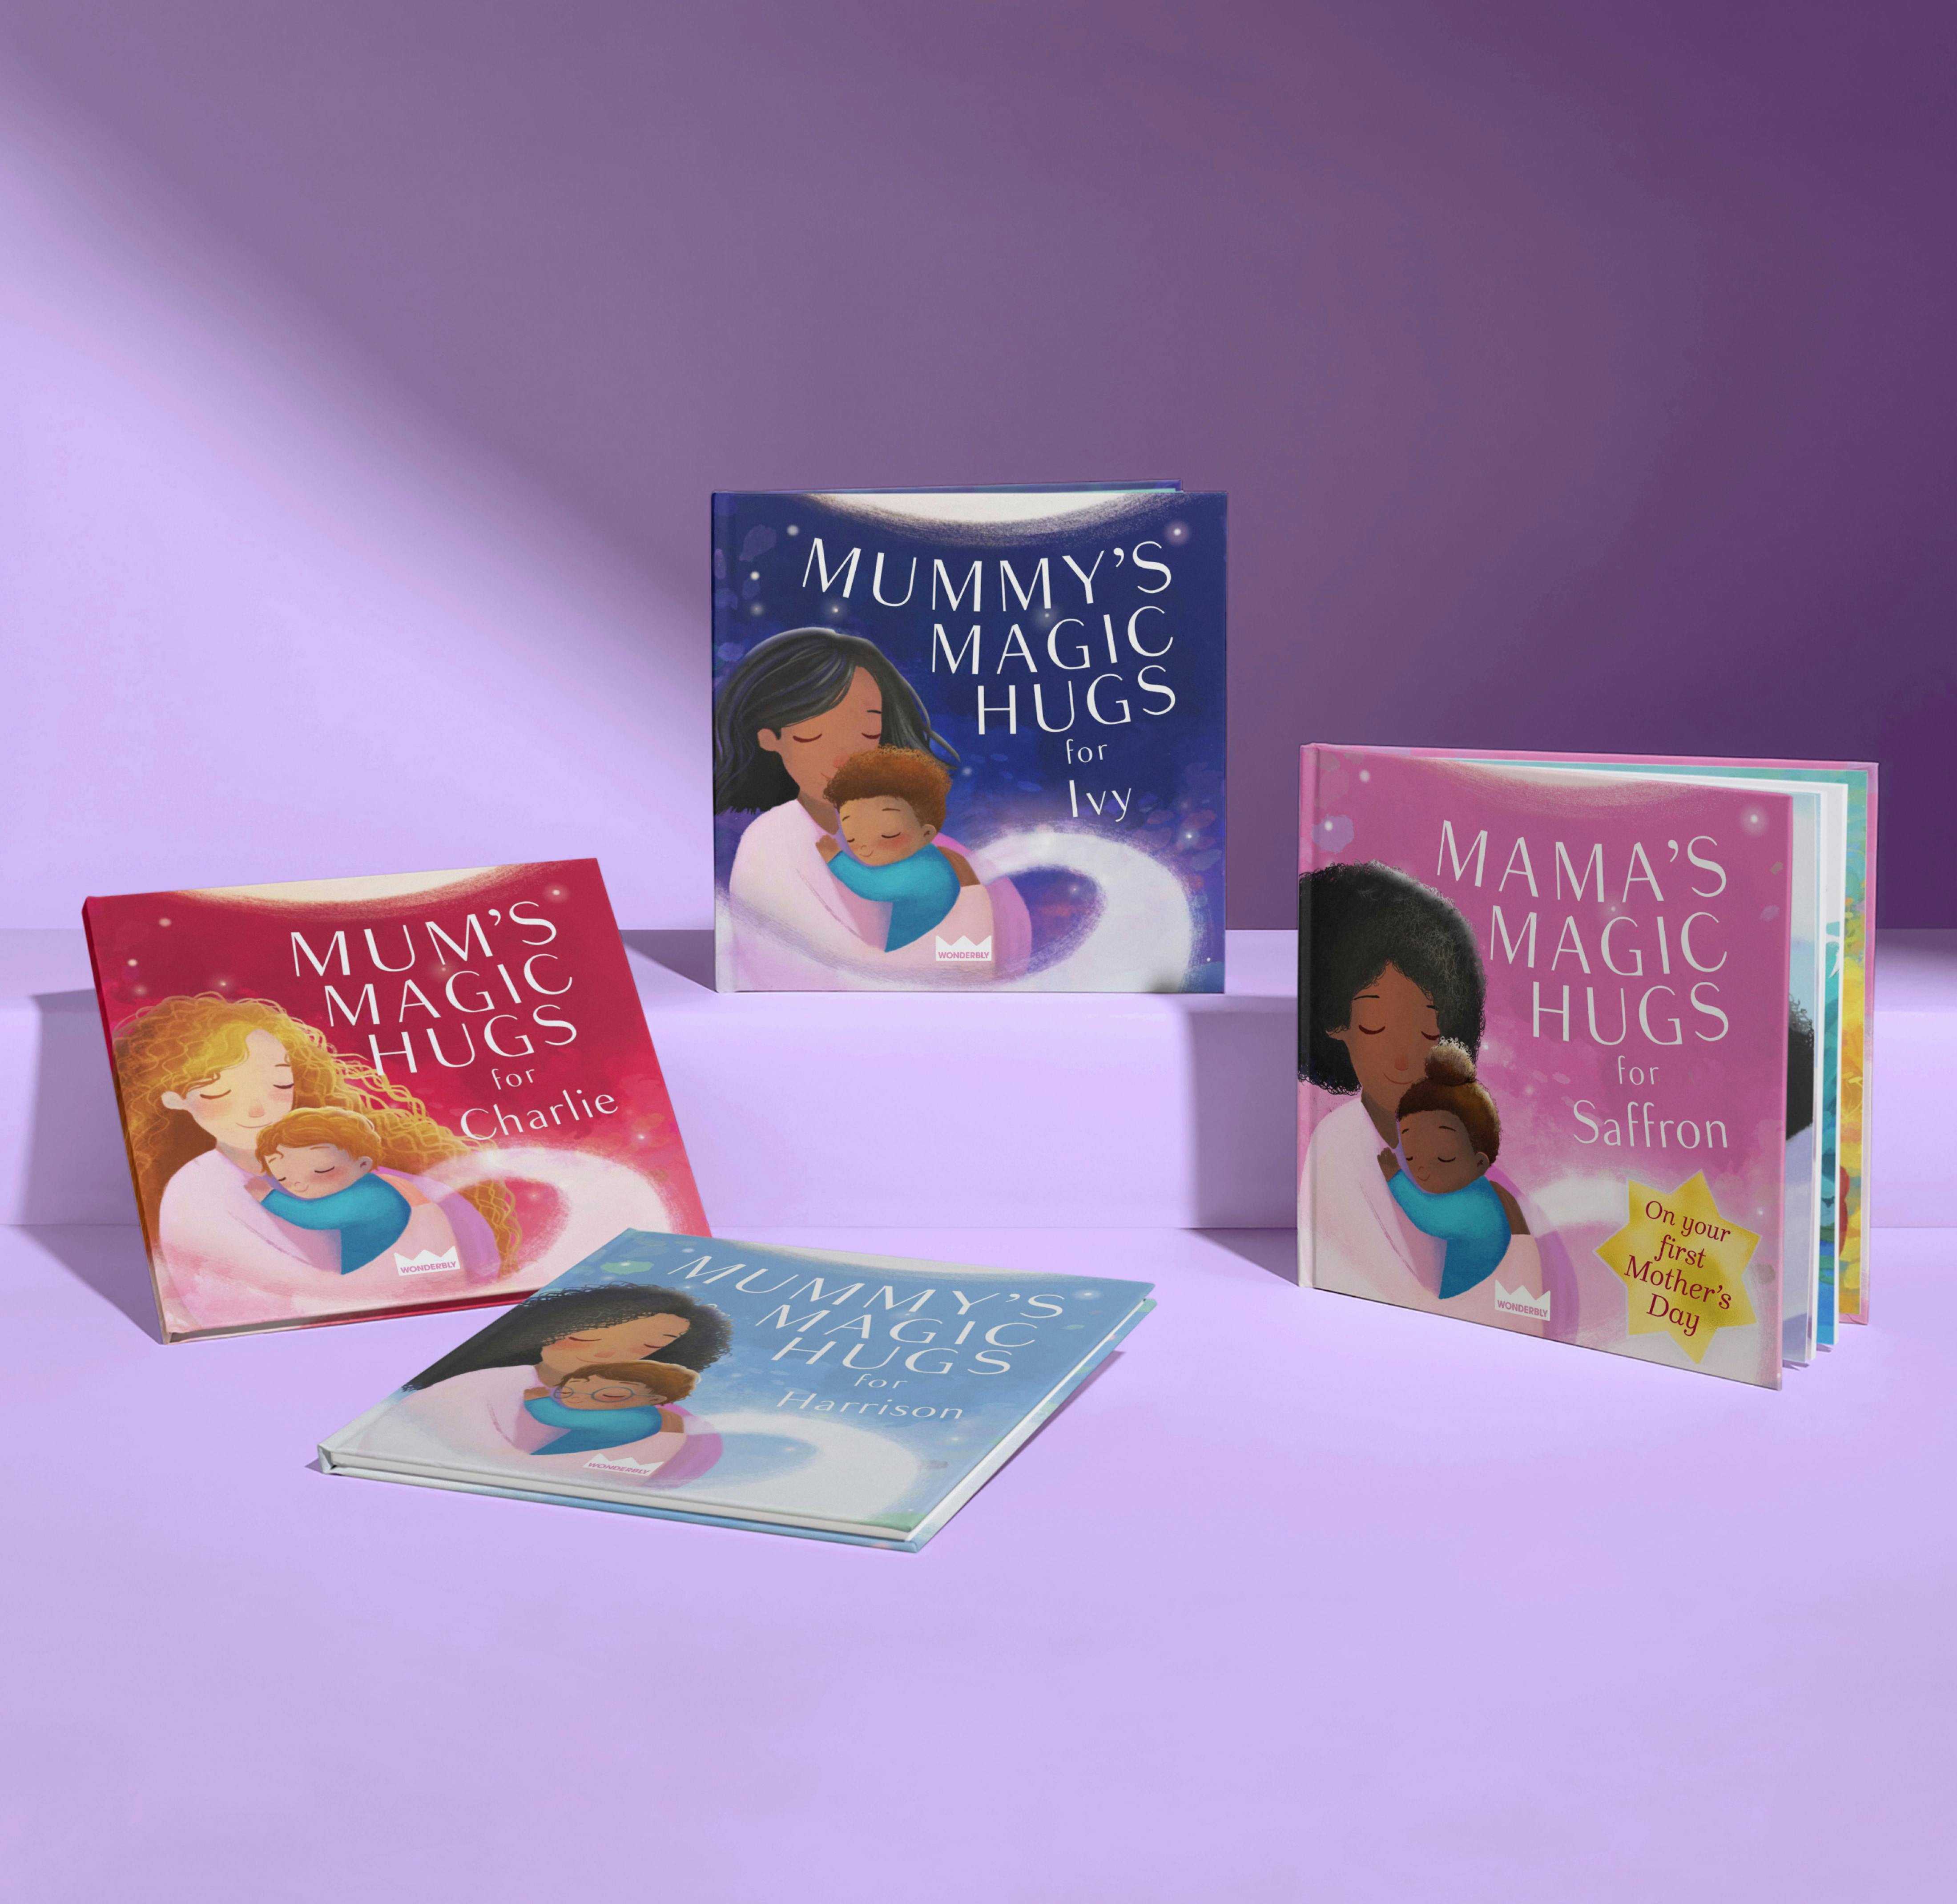 mummy's magic hugs with special cover 'On your first Mother's Day'